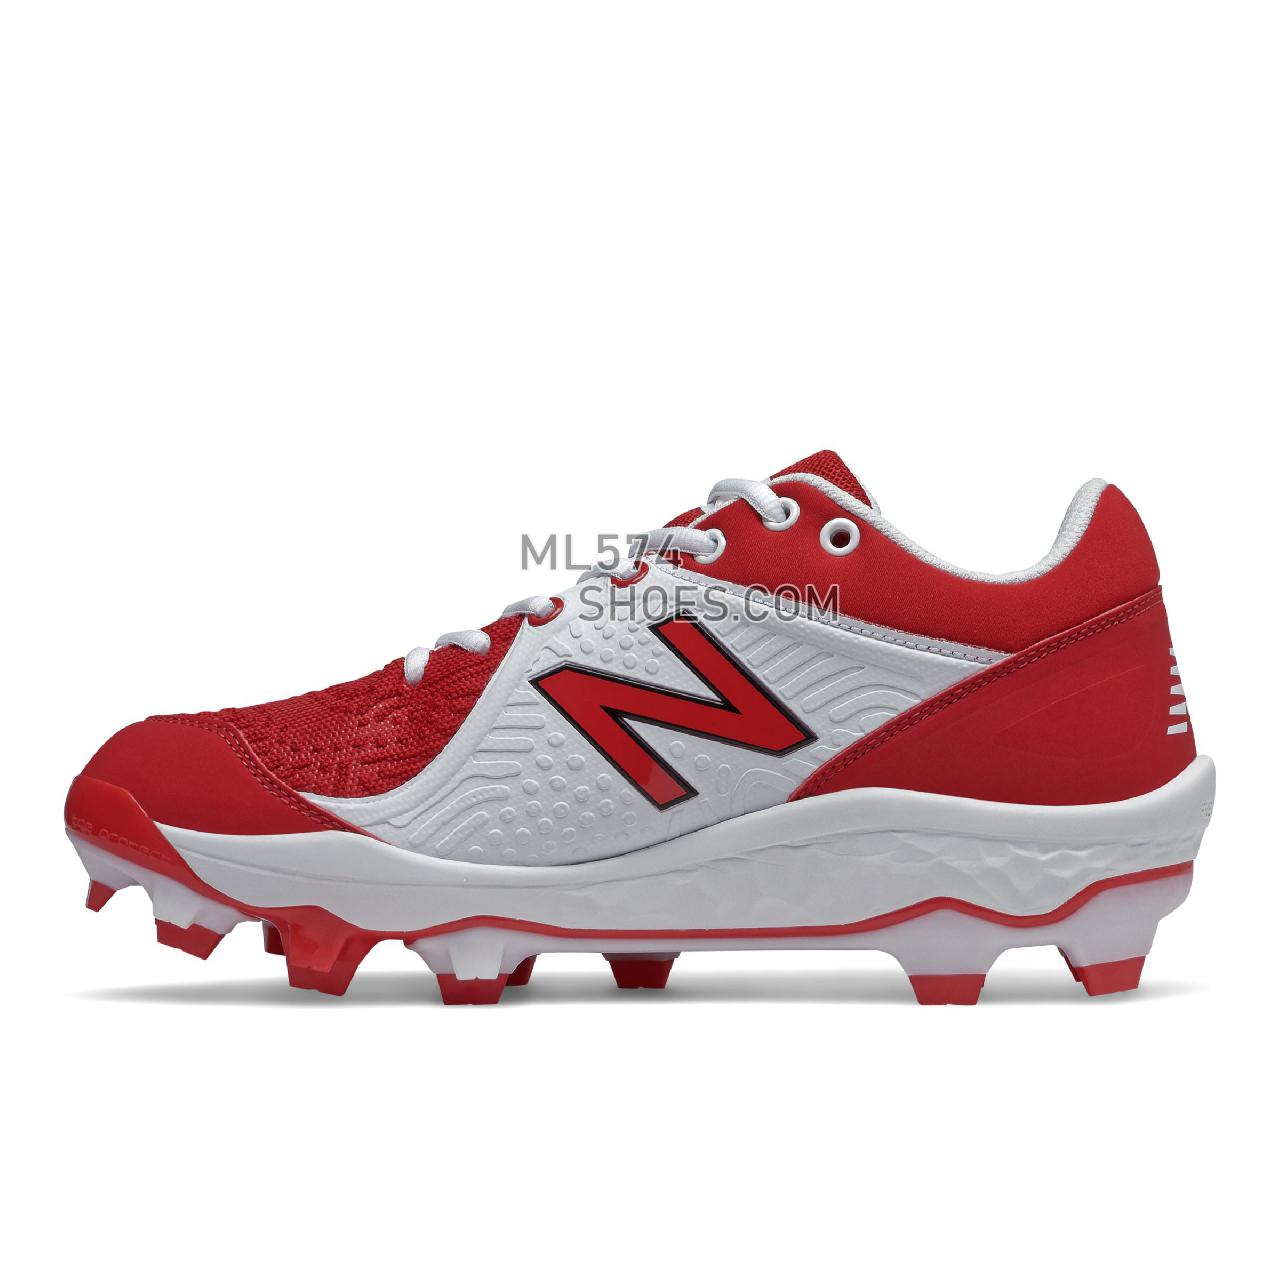 New Balance Fresh Foam 3000 v5 Molded - Men's Mid-Cut Baseball Cleats - Red with White - PL3000R5